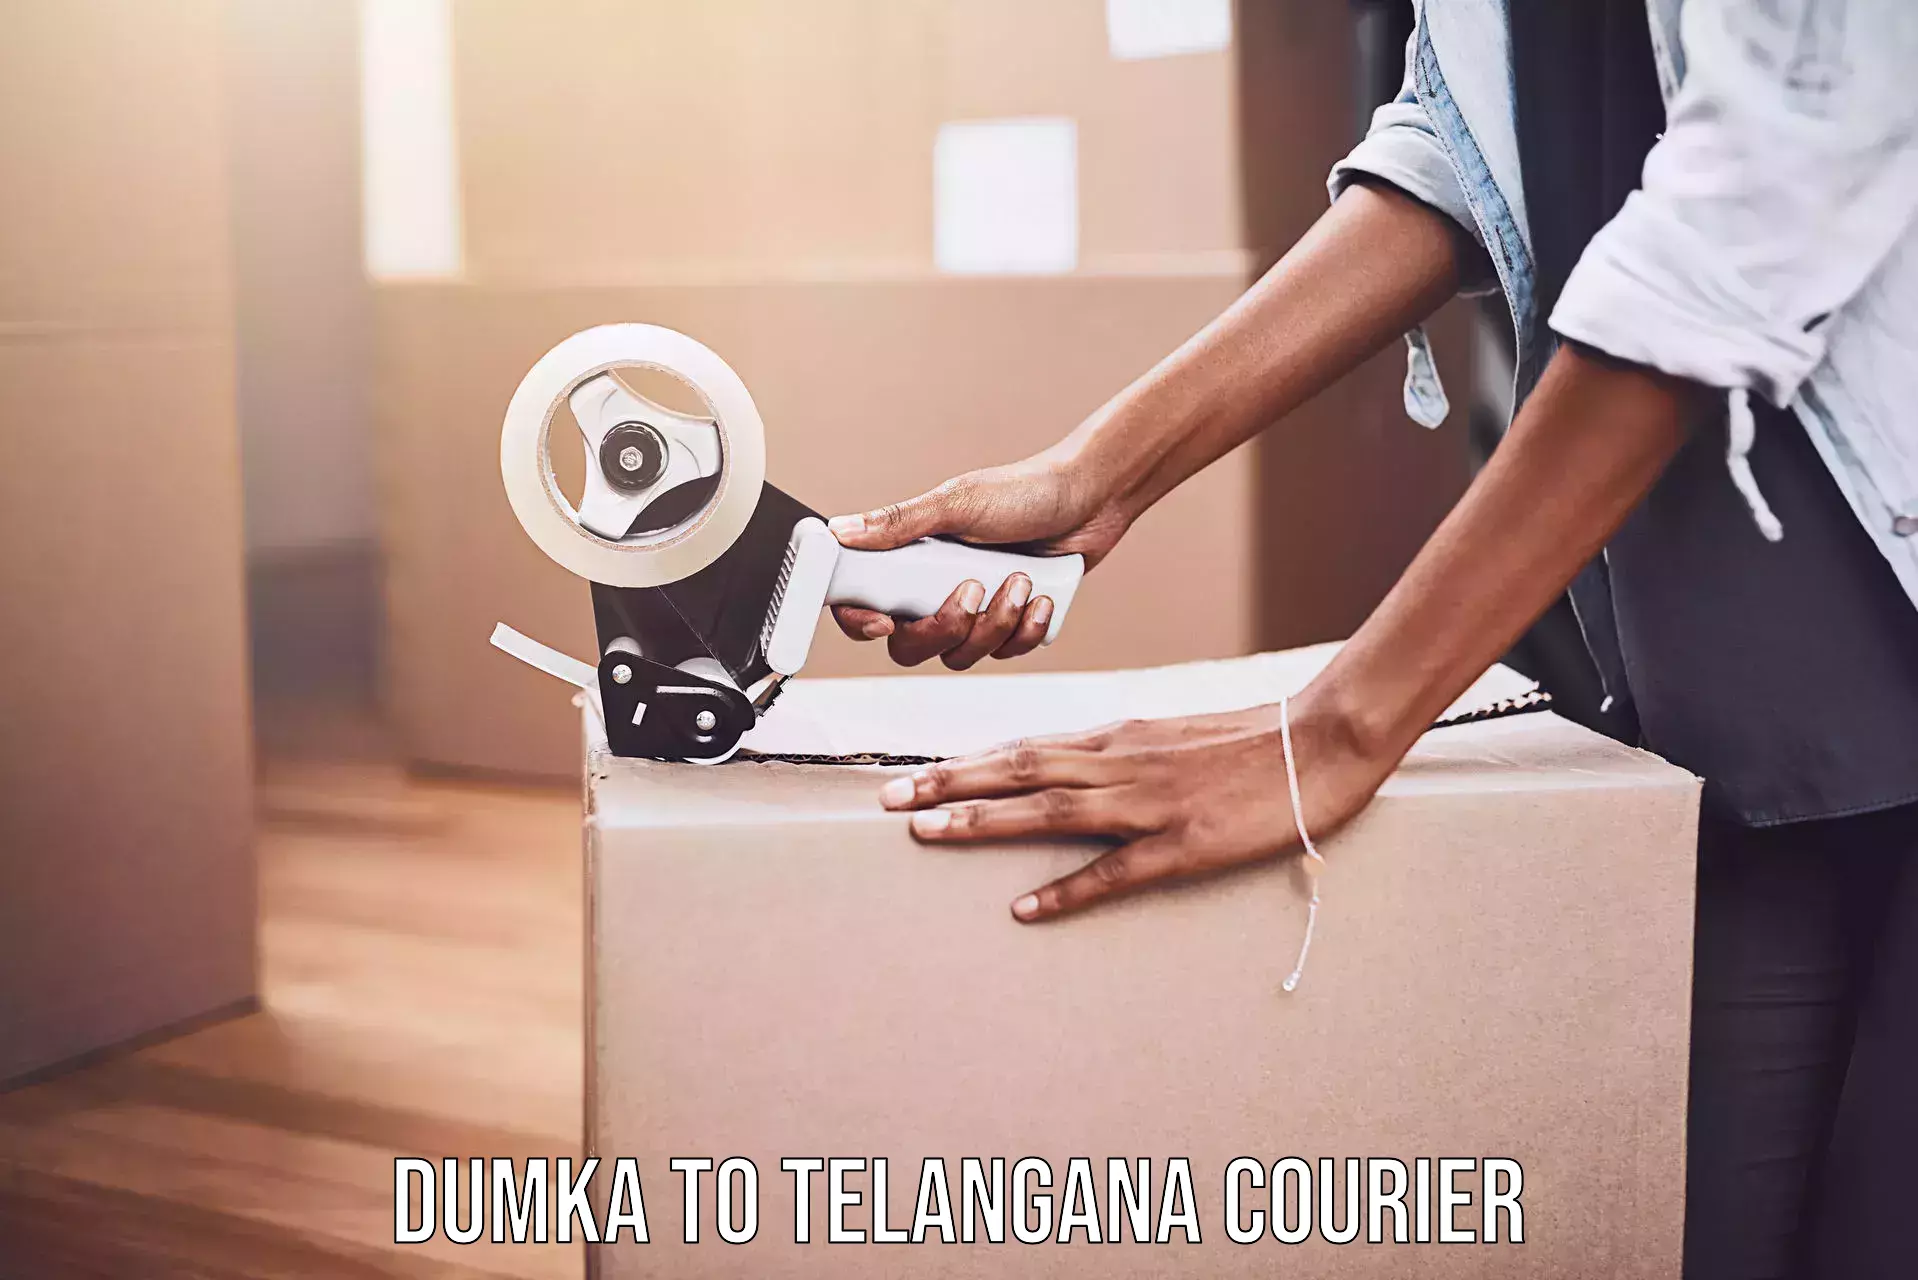 Reliable delivery network Dumka to Kamalapur